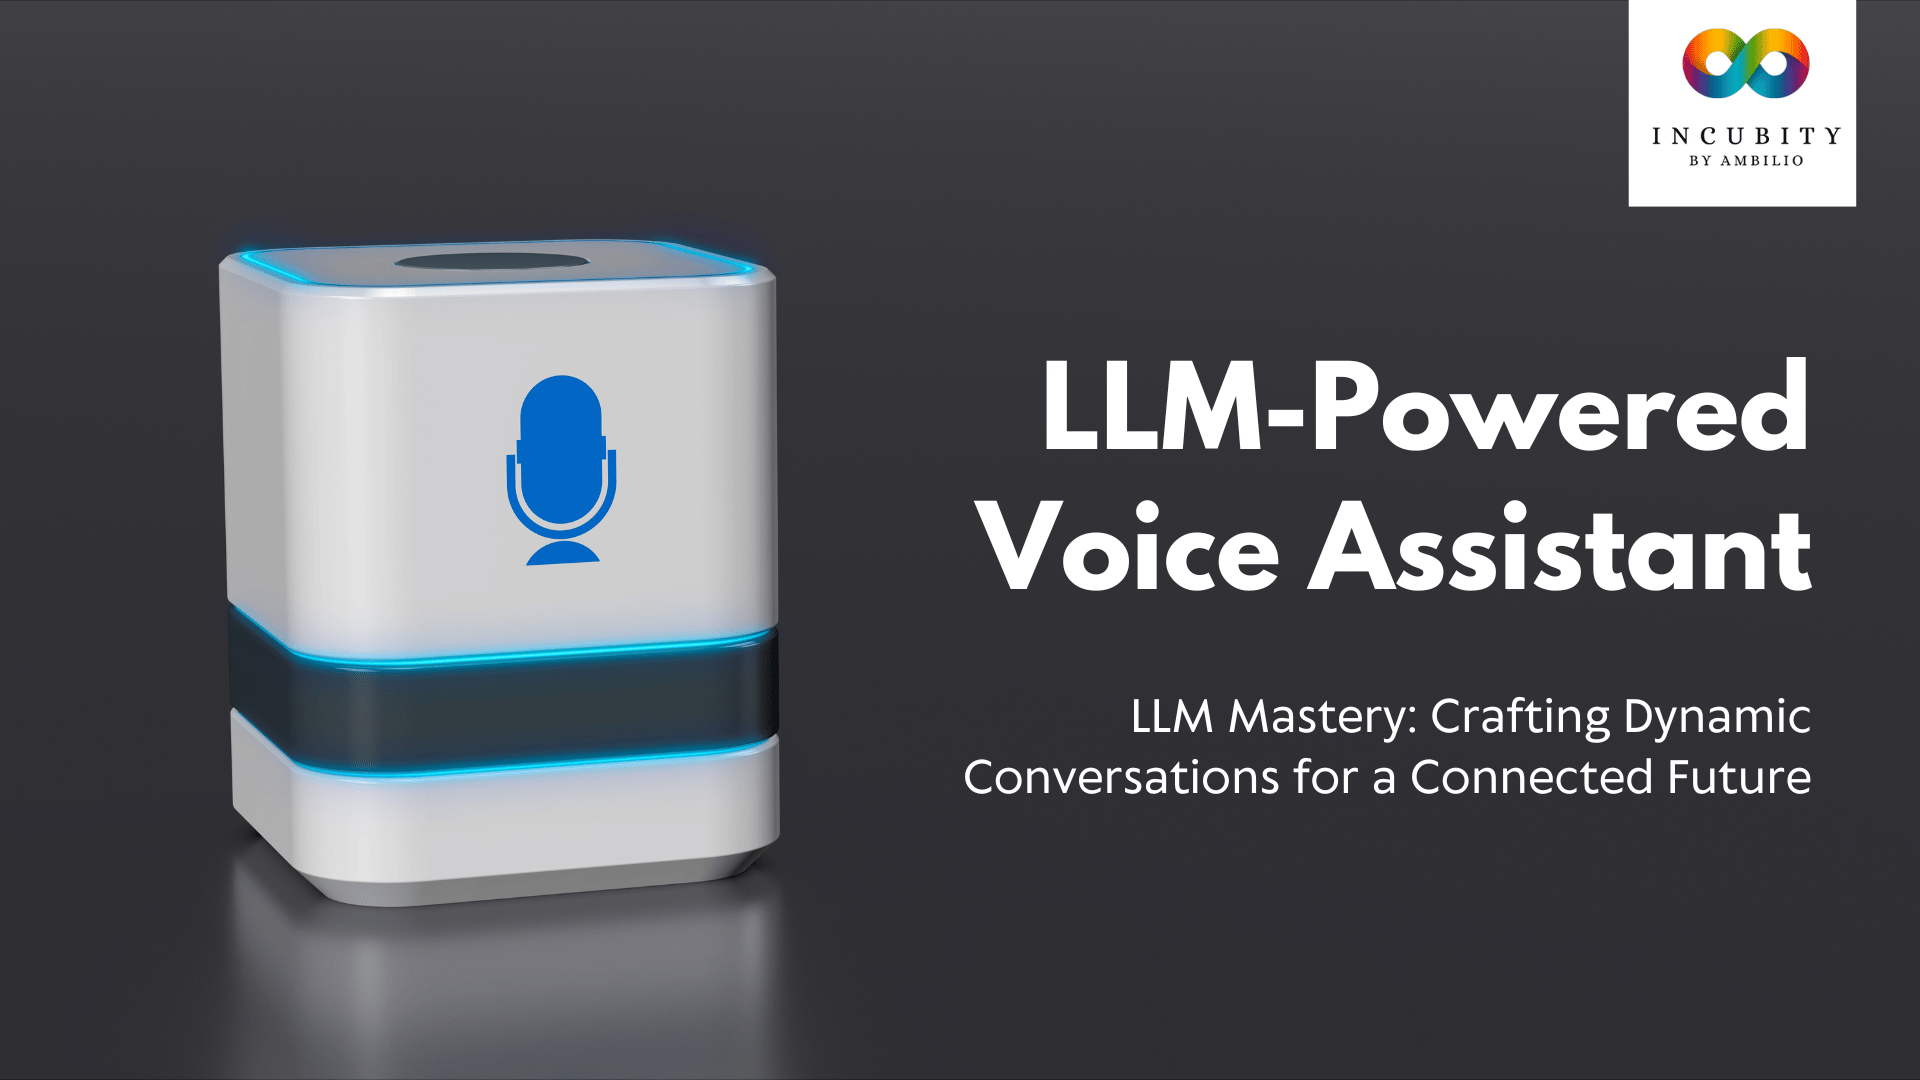 LLM-Powered Voice Assistant